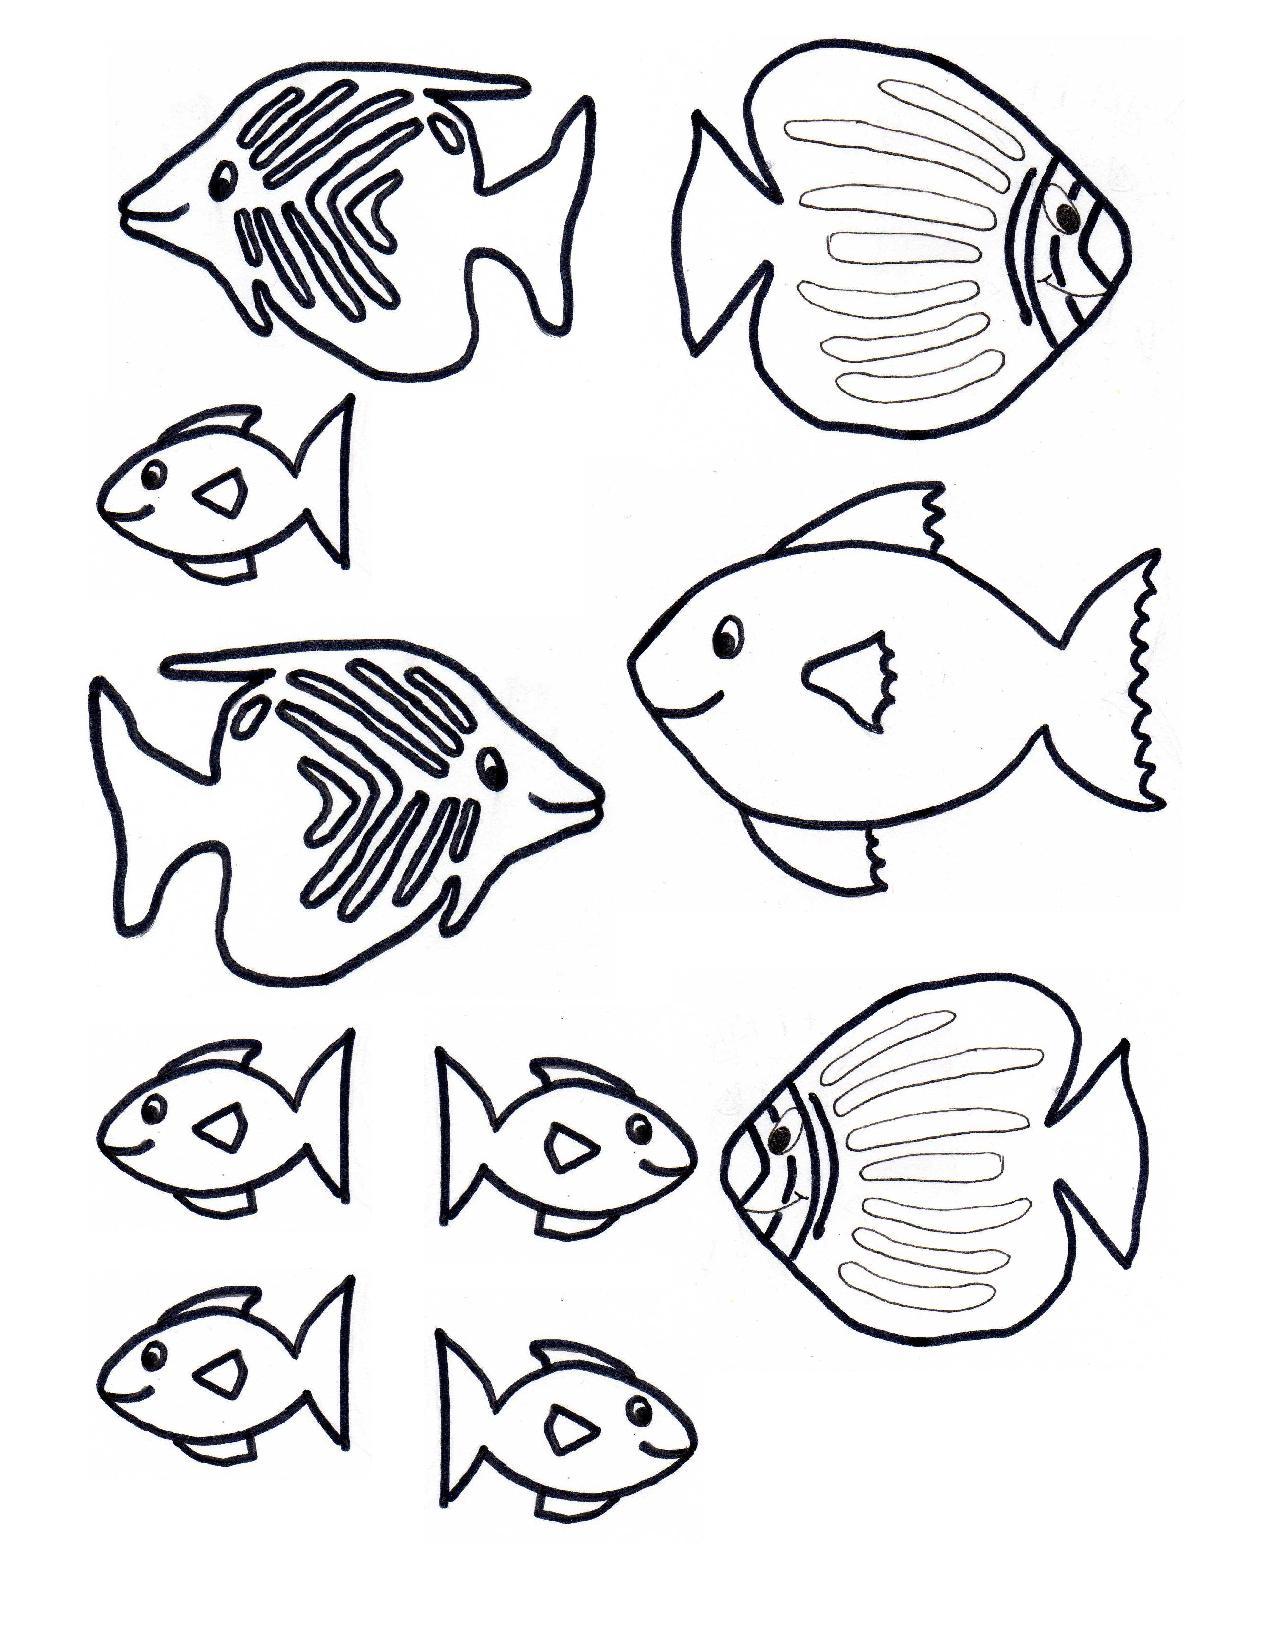 Free Fish Template, Download Free Fish Template png images, Free